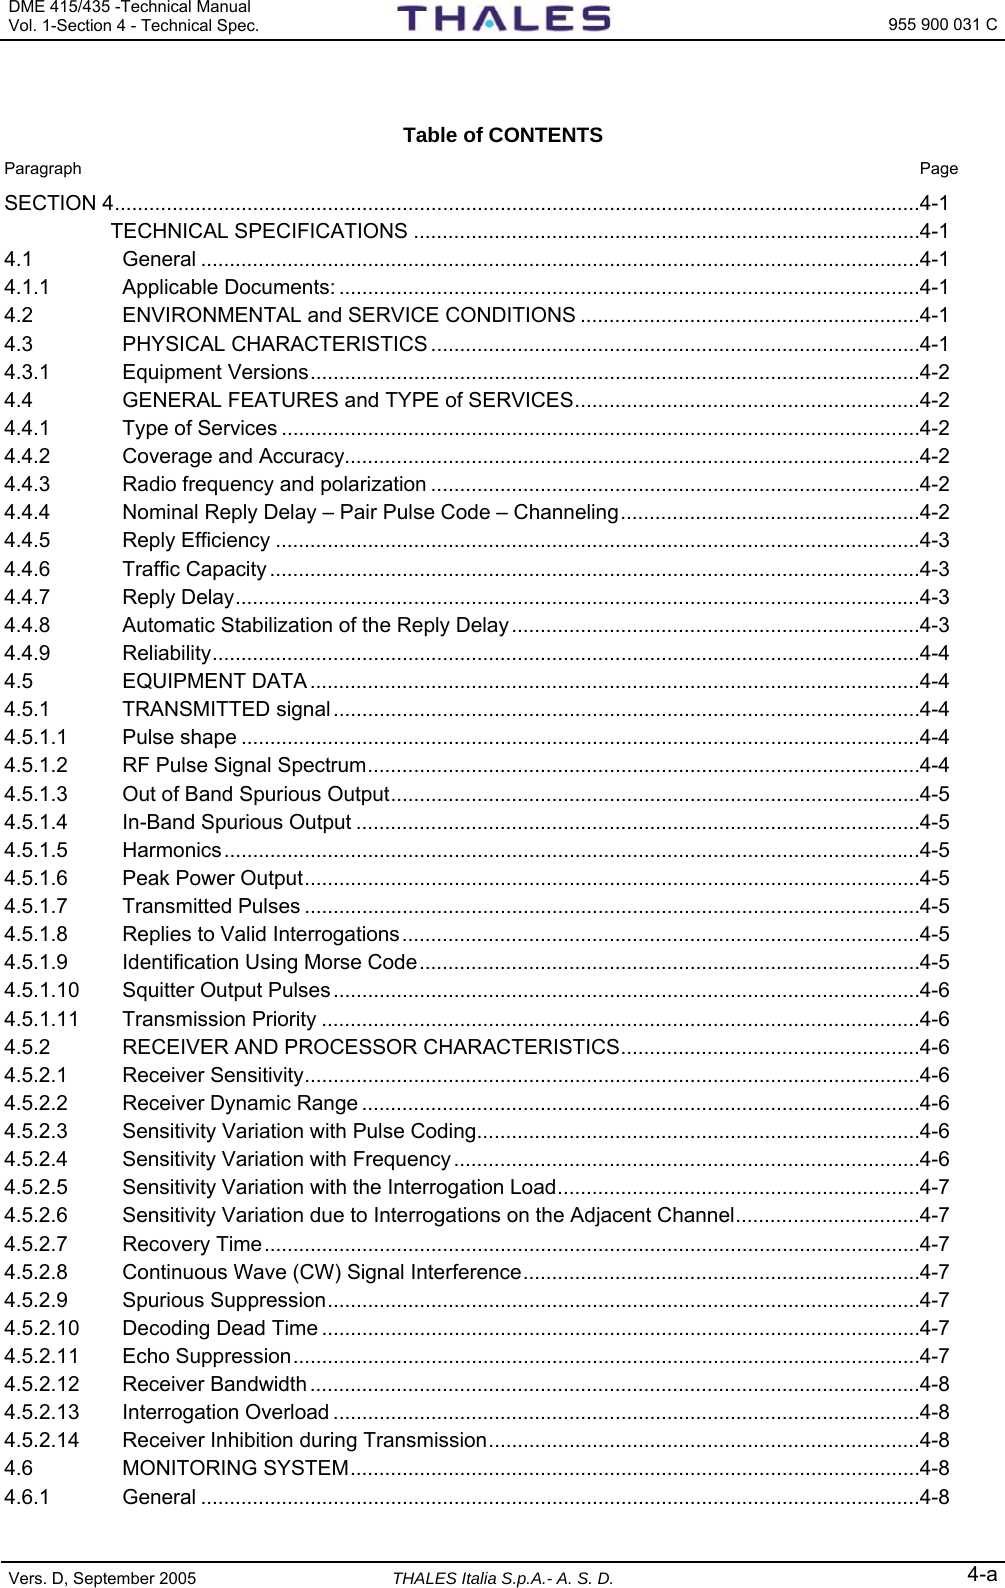 DME 415/435 -Technical Manual  Vol. 1-Section 4 - Technical Spec.   955 900 031 C Vers. D, September 2005  THALES Italia S.p.A.- A. S. D. 4-a  Table of CONTENTS  Paragraph  Page SECTION 4............................................................................................................................................4-1  TECHNICAL SPECIFICATIONS ........................................................................................4-1 4.1 General .............................................................................................................................4-1 4.1.1 Applicable Documents: .....................................................................................................4-1 4.2 ENVIRONMENTAL and SERVICE CONDITIONS ...........................................................4-1 4.3 PHYSICAL CHARACTERISTICS .....................................................................................4-1 4.3.1 Equipment Versions..........................................................................................................4-2 4.4 GENERAL FEATURES and TYPE of SERVICES............................................................4-2 4.4.1 Type of Services ...............................................................................................................4-2 4.4.2 Coverage and Accuracy....................................................................................................4-2 4.4.3 Radio frequency and polarization .....................................................................................4-2 4.4.4 Nominal Reply Delay – Pair Pulse Code – Channeling....................................................4-2 4.4.5 Reply Efficiency ................................................................................................................4-3 4.4.6 Traffic Capacity .................................................................................................................4-3 4.4.7 Reply Delay.......................................................................................................................4-3 4.4.8 Automatic Stabilization of the Reply Delay.......................................................................4-3 4.4.9 Reliability...........................................................................................................................4-4 4.5 EQUIPMENT DATA ..........................................................................................................4-4 4.5.1 TRANSMITTED signal ......................................................................................................4-4 4.5.1.1 Pulse shape ......................................................................................................................4-4 4.5.1.2 RF Pulse Signal Spectrum................................................................................................4-4 4.5.1.3 Out of Band Spurious Output............................................................................................4-5 4.5.1.4 In-Band Spurious Output ..................................................................................................4-5 4.5.1.5 Harmonics.........................................................................................................................4-5 4.5.1.6 Peak Power Output...........................................................................................................4-5 4.5.1.7 Transmitted Pulses ...........................................................................................................4-5 4.5.1.8 Replies to Valid Interrogations..........................................................................................4-5 4.5.1.9 Identification Using Morse Code.......................................................................................4-5 4.5.1.10 Squitter Output Pulses......................................................................................................4-6 4.5.1.11 Transmission Priority ........................................................................................................4-6 4.5.2 RECEIVER AND PROCESSOR CHARACTERISTICS....................................................4-6 4.5.2.1 Receiver Sensitivity...........................................................................................................4-6 4.5.2.2 Receiver Dynamic Range .................................................................................................4-6 4.5.2.3 Sensitivity Variation with Pulse Coding.............................................................................4-6 4.5.2.4 Sensitivity Variation with Frequency .................................................................................4-6 4.5.2.5 Sensitivity Variation with the Interrogation Load...............................................................4-7 4.5.2.6 Sensitivity Variation due to Interrogations on the Adjacent Channel................................4-7 4.5.2.7 Recovery Time..................................................................................................................4-7 4.5.2.8 Continuous Wave (CW) Signal Interference.....................................................................4-7 4.5.2.9 Spurious Suppression.......................................................................................................4-7 4.5.2.10 Decoding Dead Time ........................................................................................................4-7 4.5.2.11 Echo Suppression.............................................................................................................4-7 4.5.2.12 Receiver Bandwidth ..........................................................................................................4-8 4.5.2.13 Interrogation Overload ......................................................................................................4-8 4.5.2.14 Receiver Inhibition during Transmission...........................................................................4-8 4.6 MONITORING SYSTEM...................................................................................................4-8 4.6.1 General .............................................................................................................................4-8 